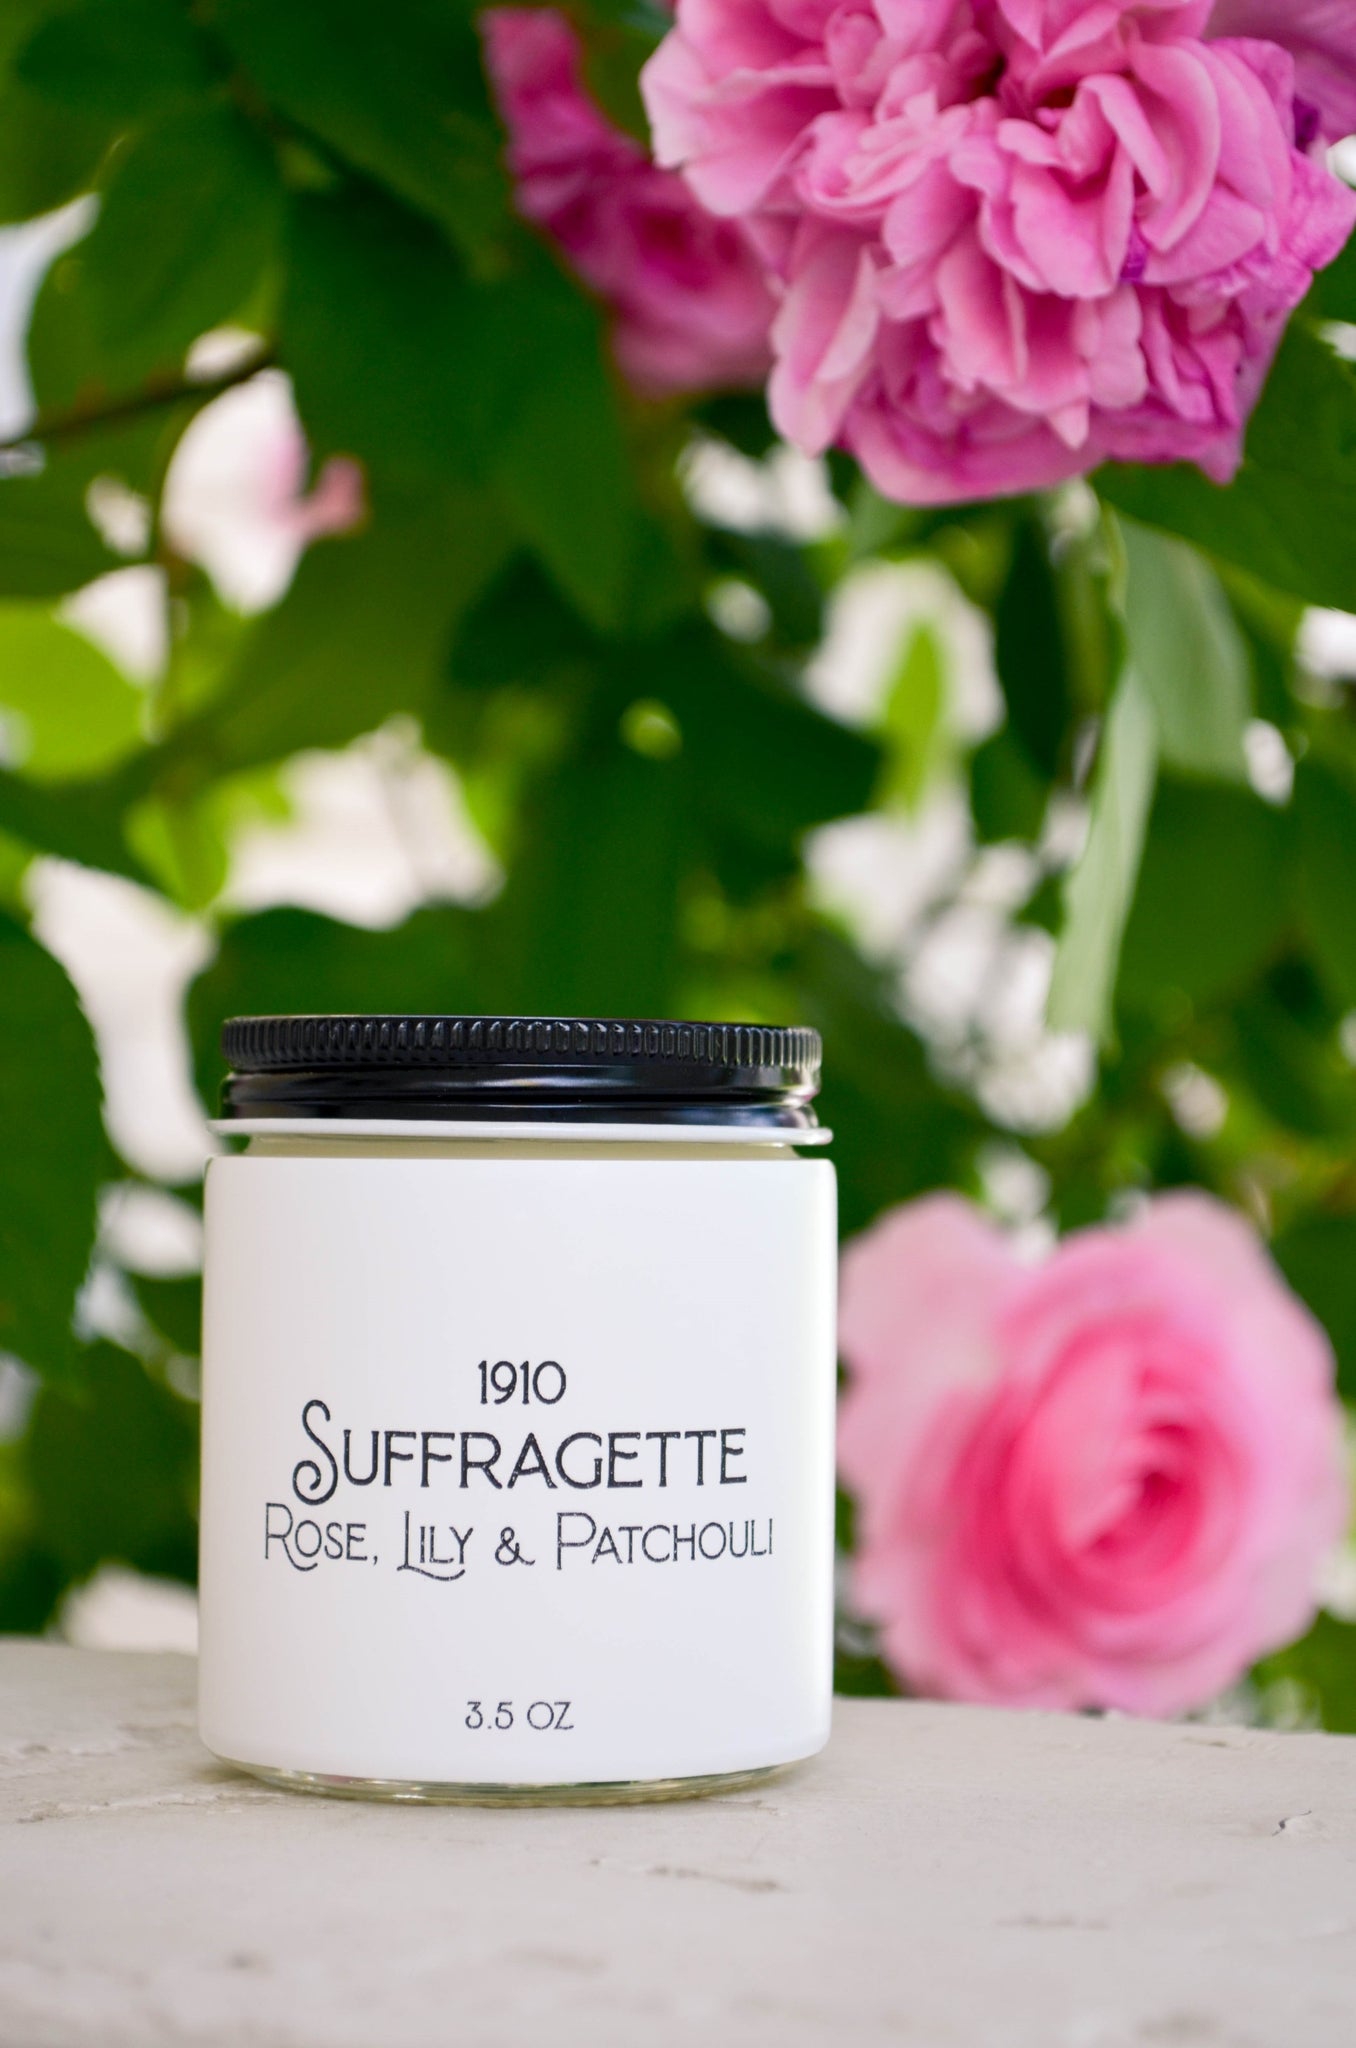 Suffragette Scented Soy Candle 3.5 oz